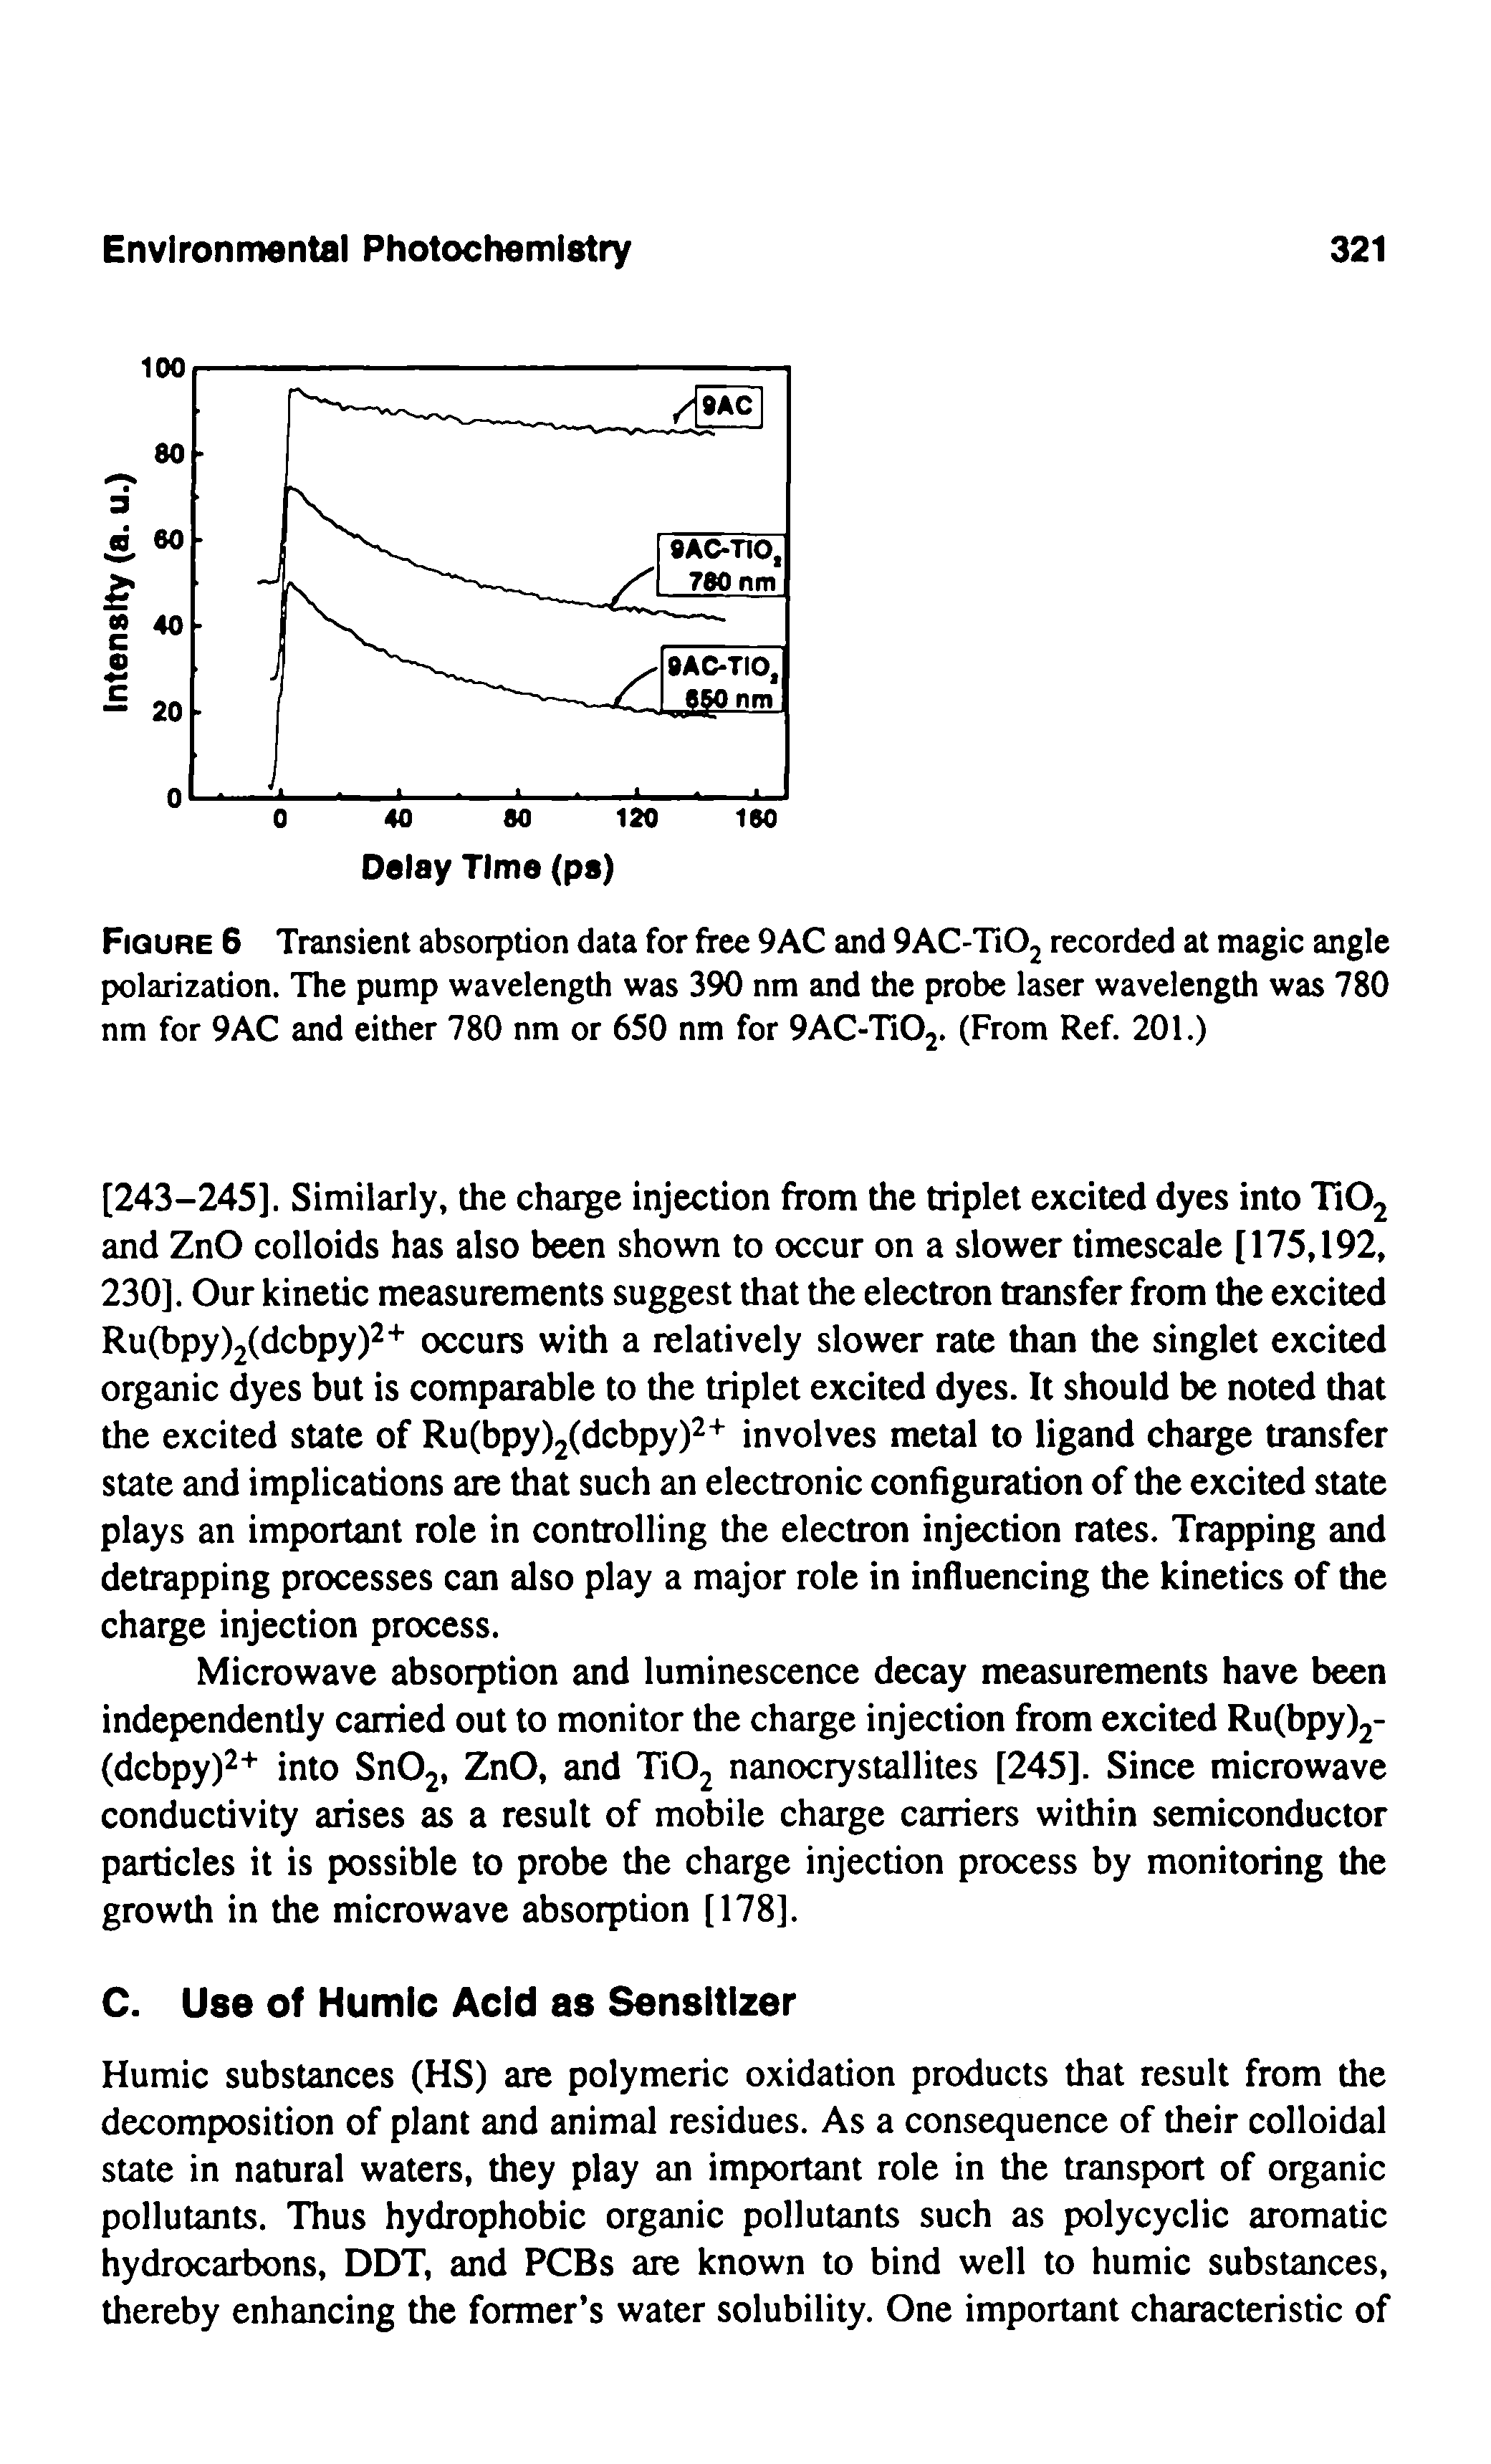 Figure 6 Transient absorption data for free 9AC and 9AC-Ti02 recorded at magic angle polarization. The pump wavelength was 390 nm and the probe laser wavelength was 780 nm for 9AC and either 780 nm or 650 nm for 9AC-Ti02. (From Ref. 201.)...